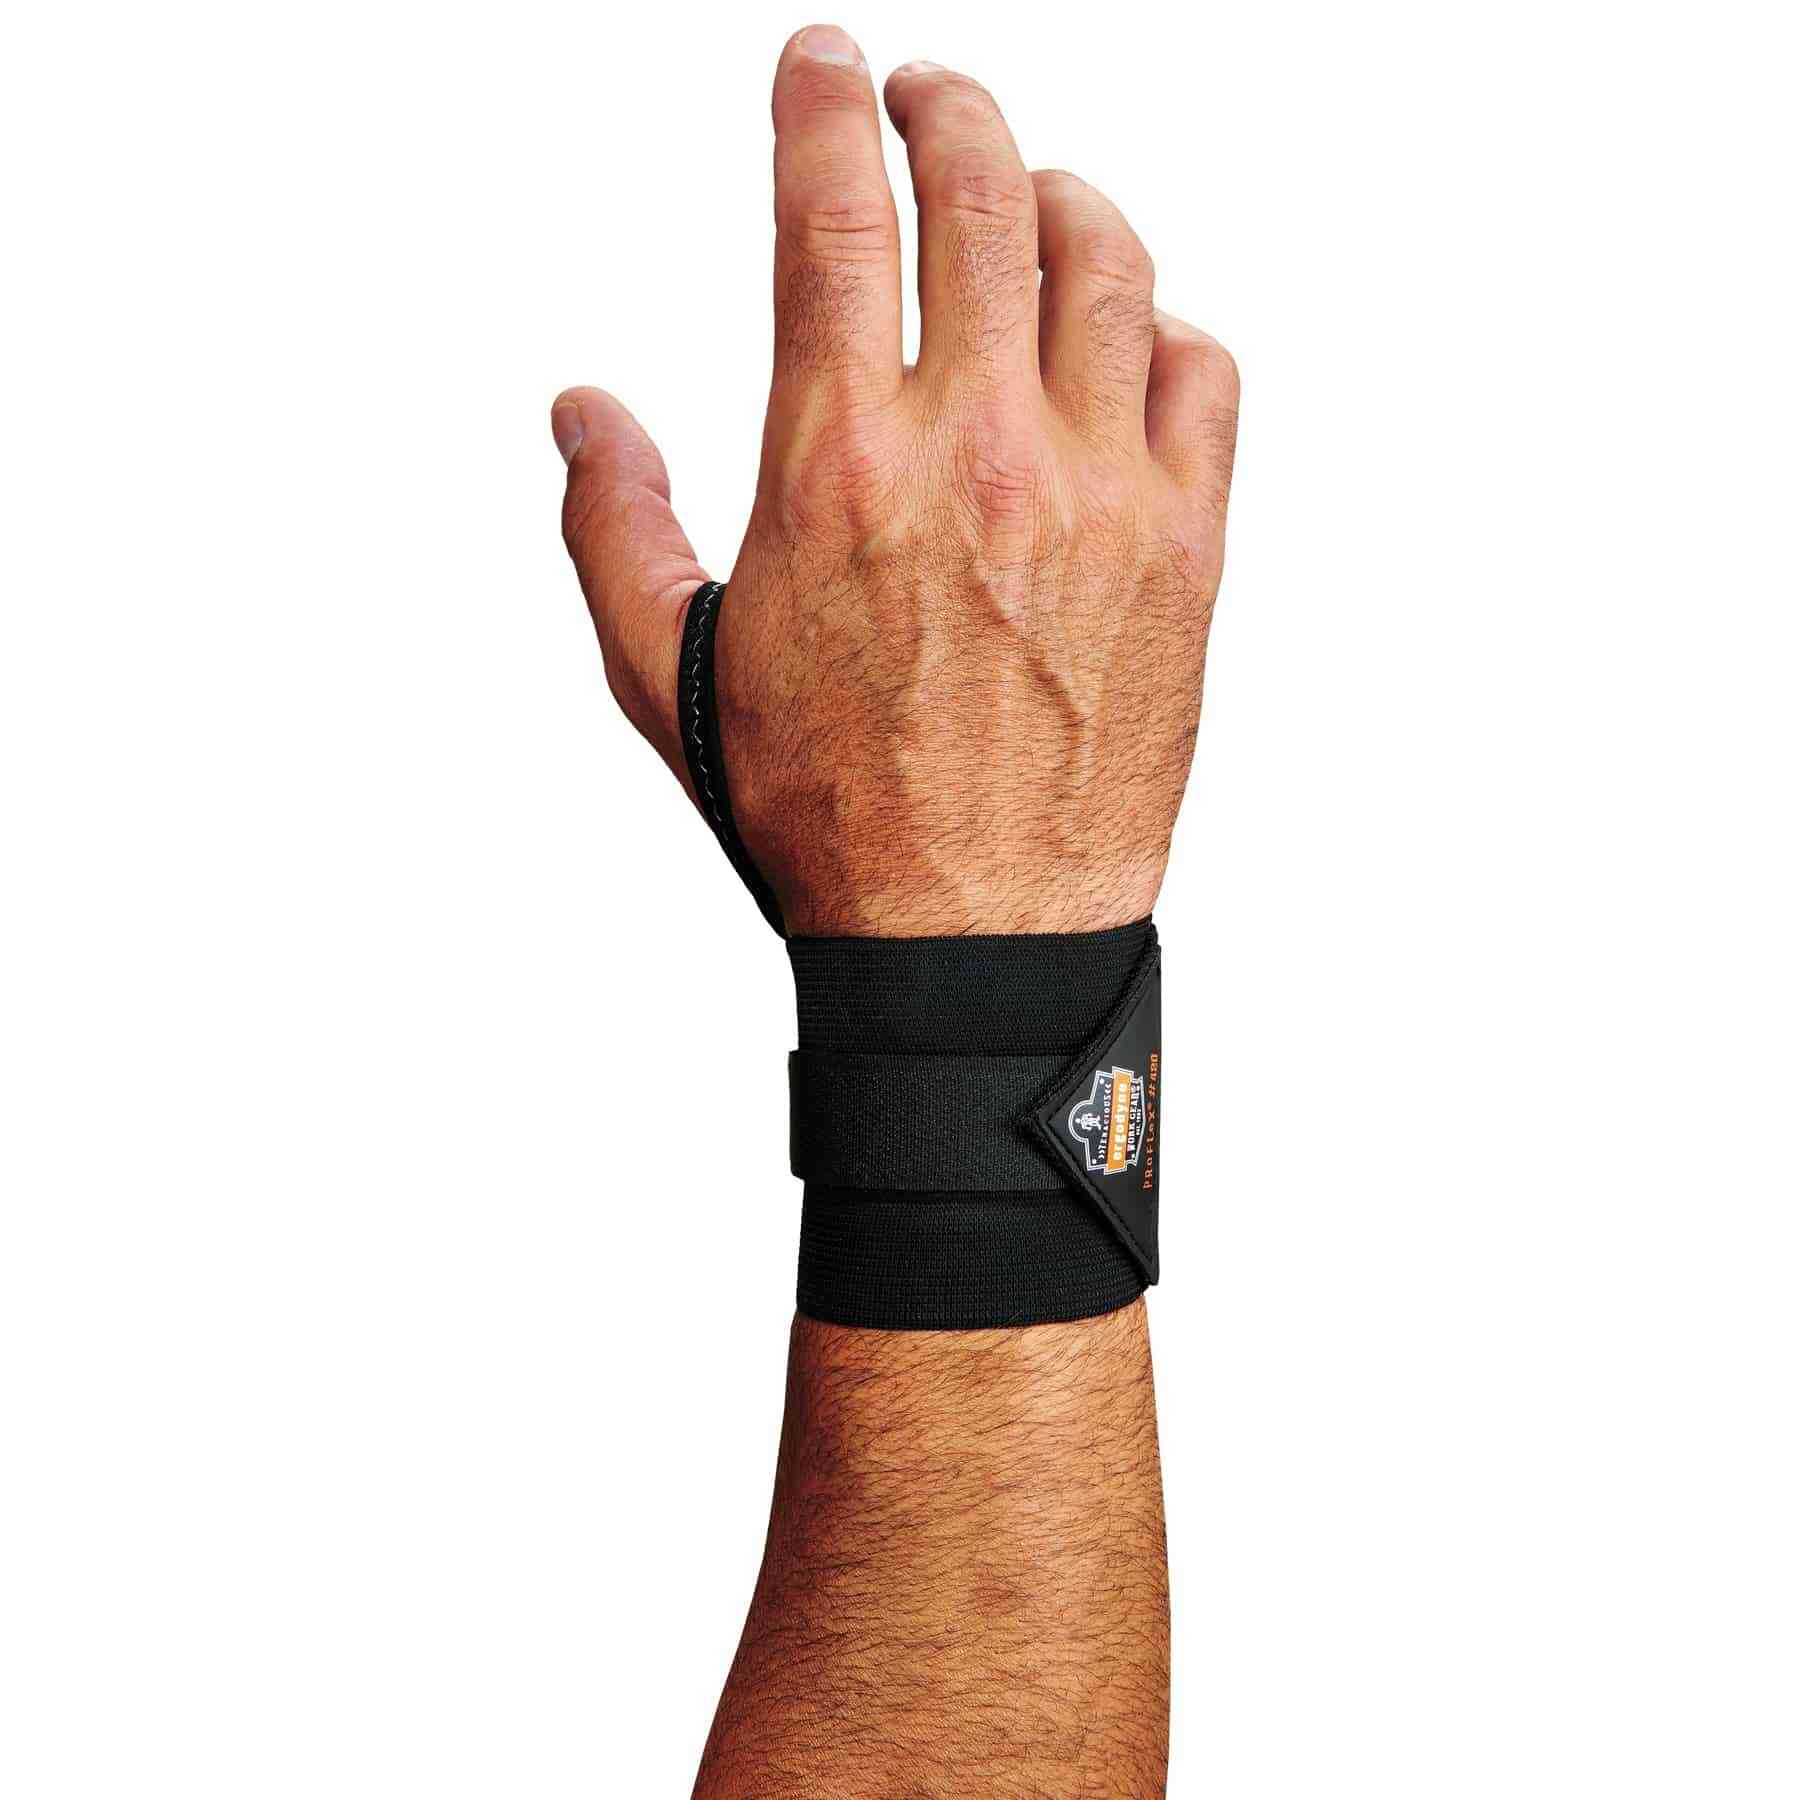 Buy DMY Wrist Wraps, 18 Professional Grade with Thumb Loops